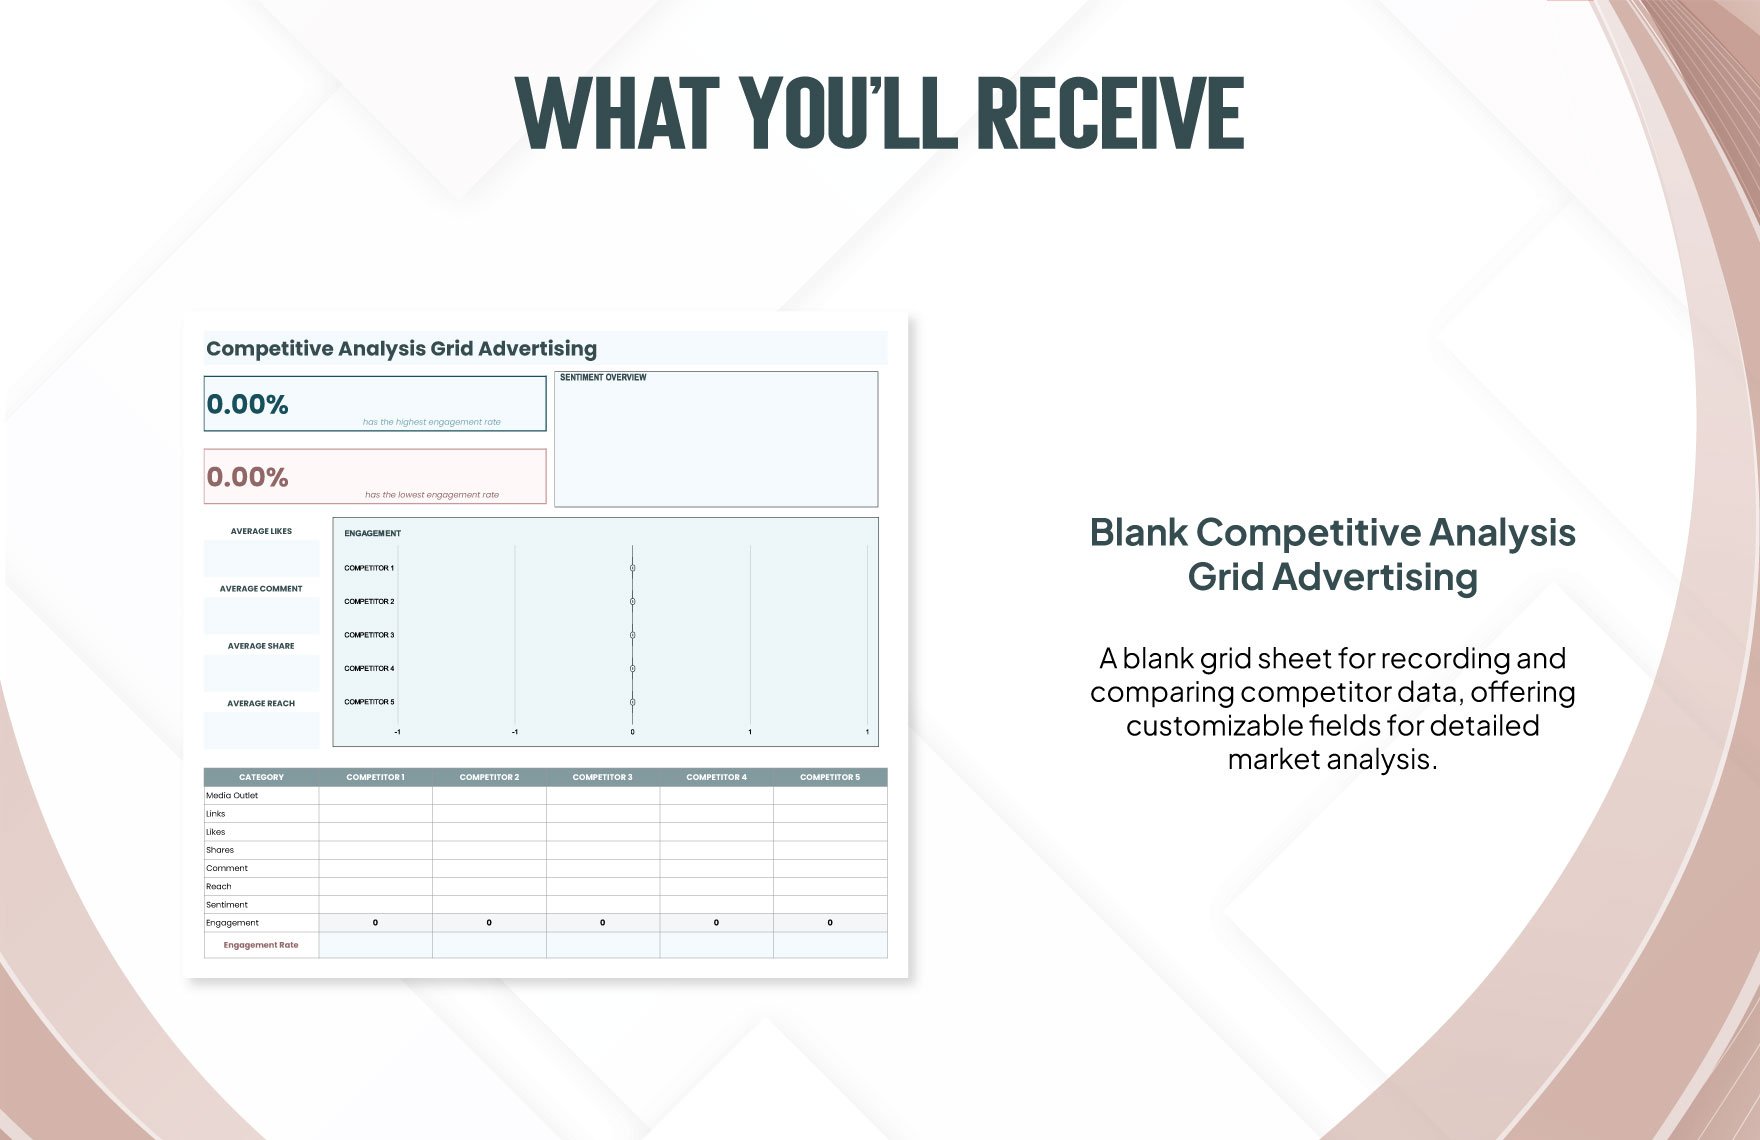 Competitive Analysis Grid Advertising Template